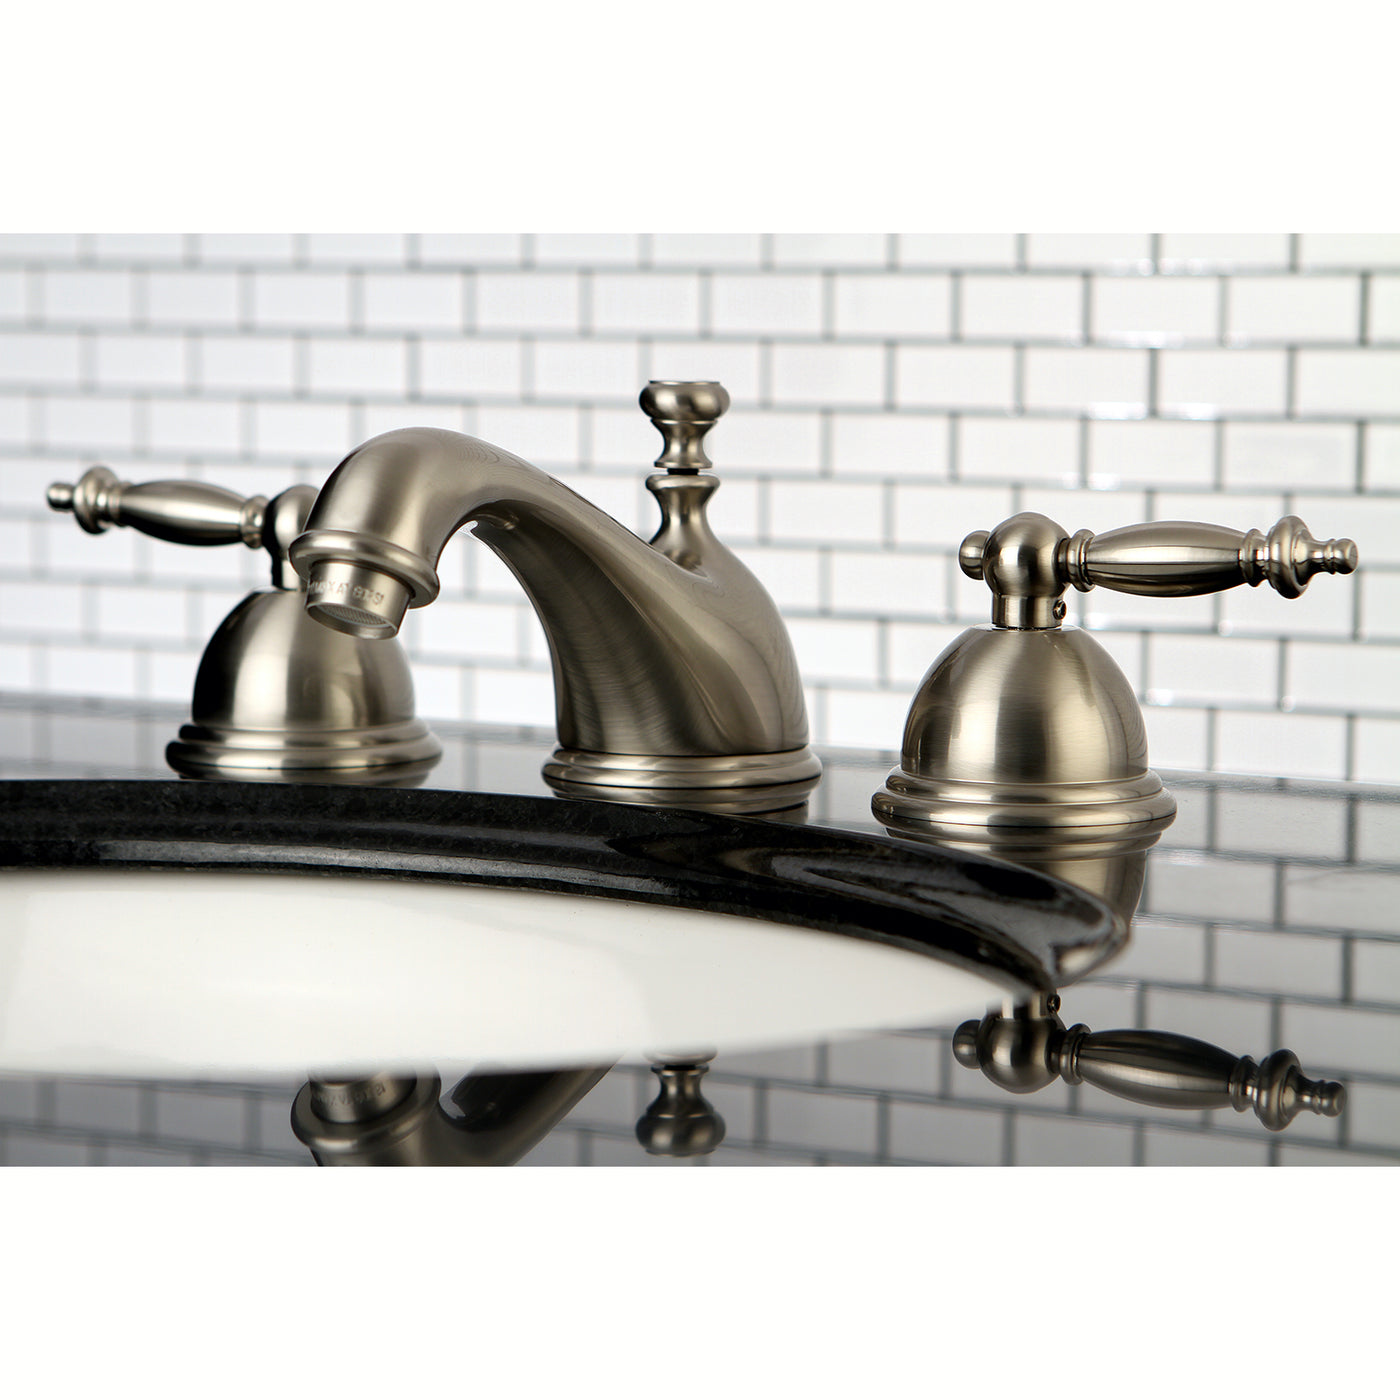 Elements of Design ES3968TL Widespread Bathroom Faucet with Brass Pop-Up, Brushed Nickel